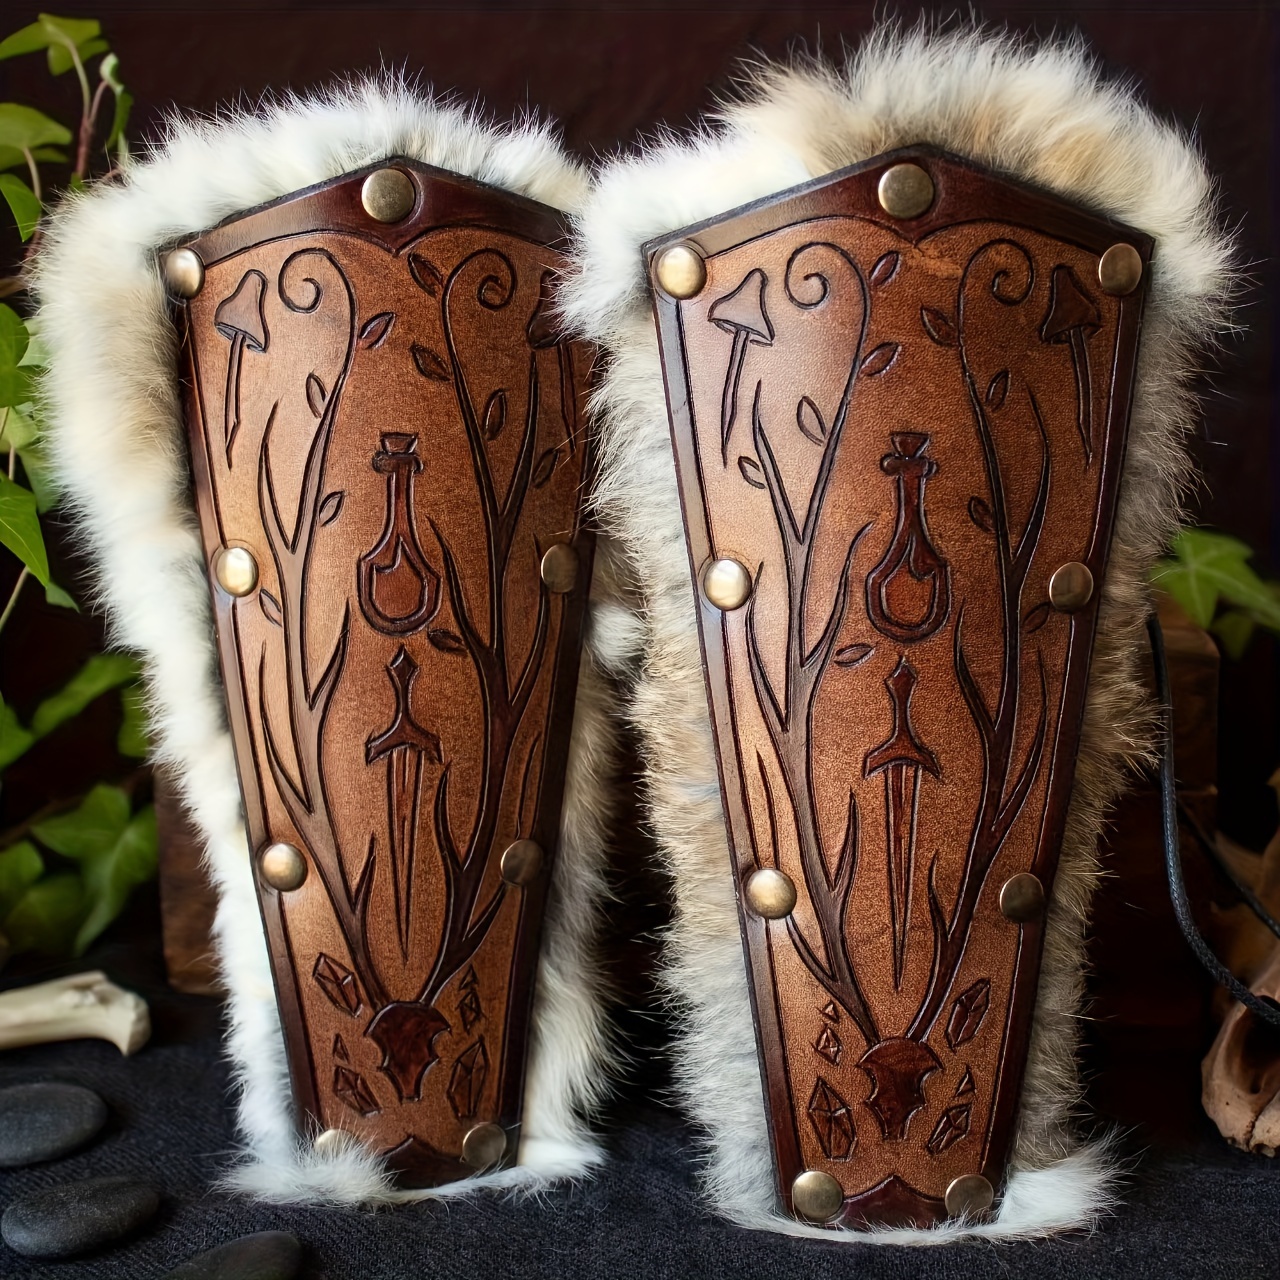 Viking Leather Bracers Embossed Leather. Available in: brown